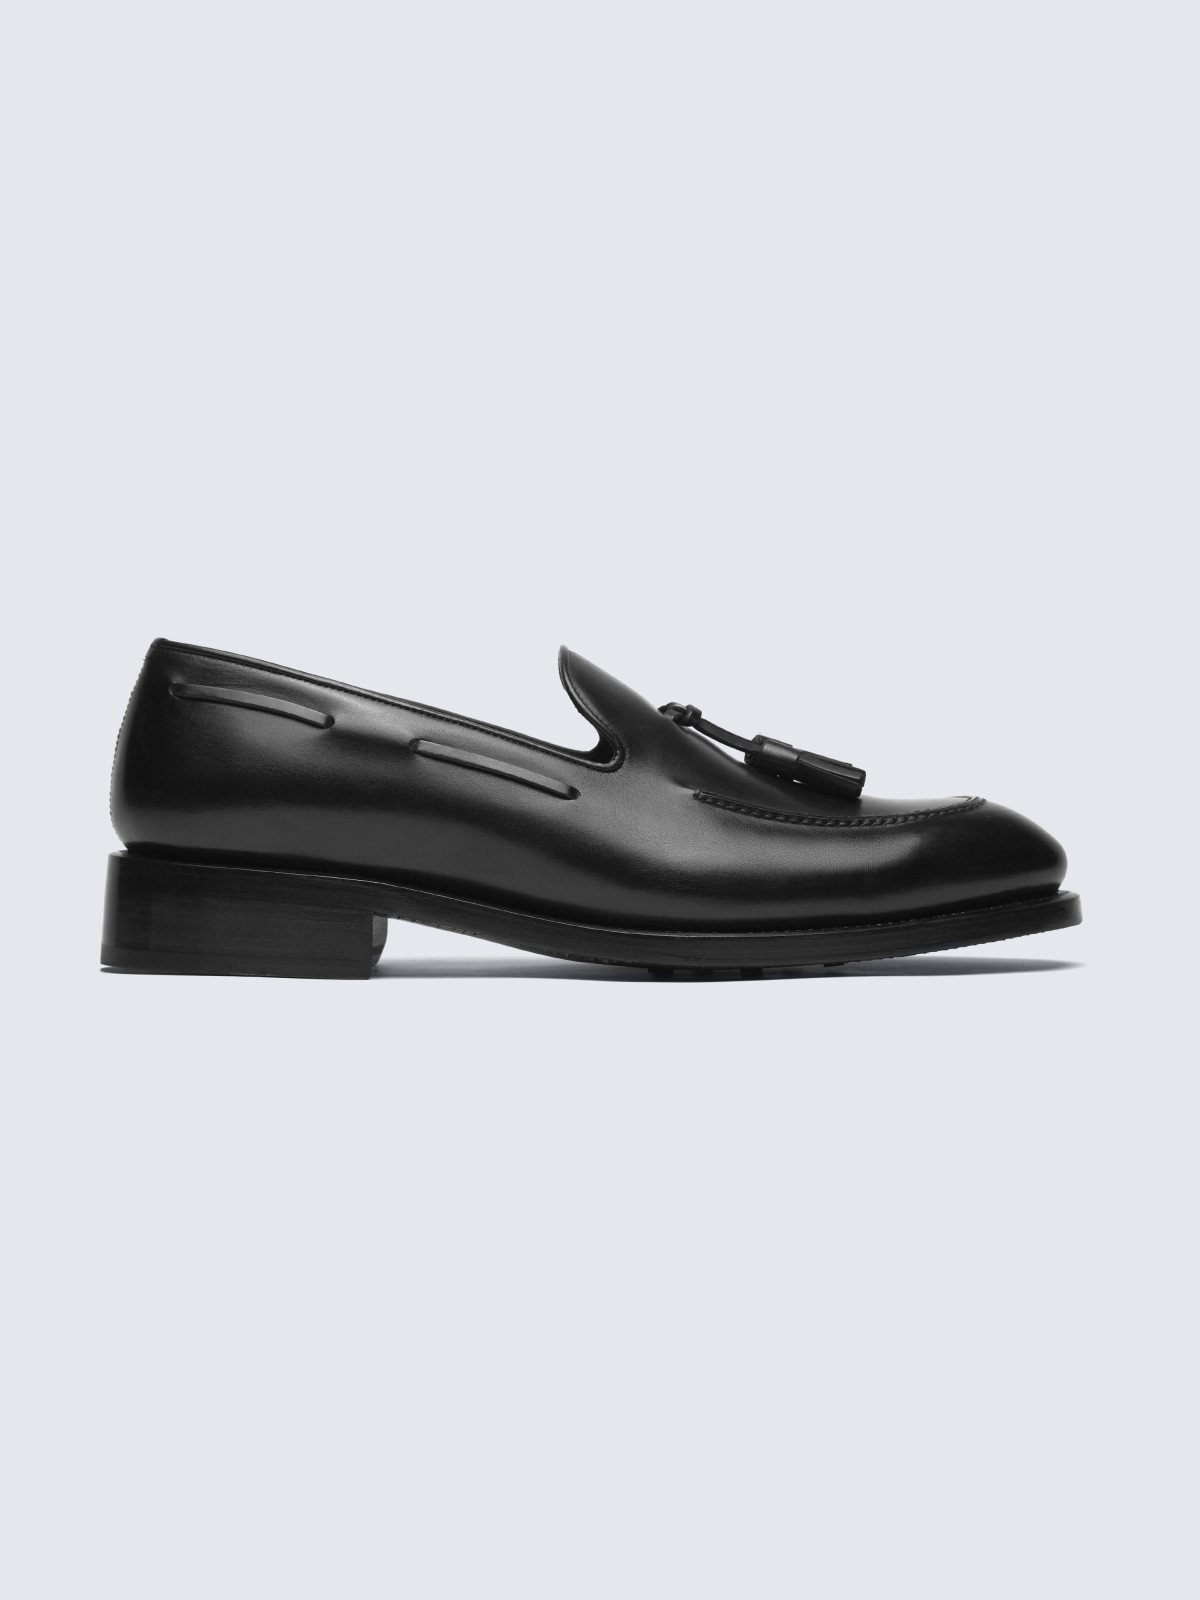 Black leather tassel loafers | Brioni® US Official Store